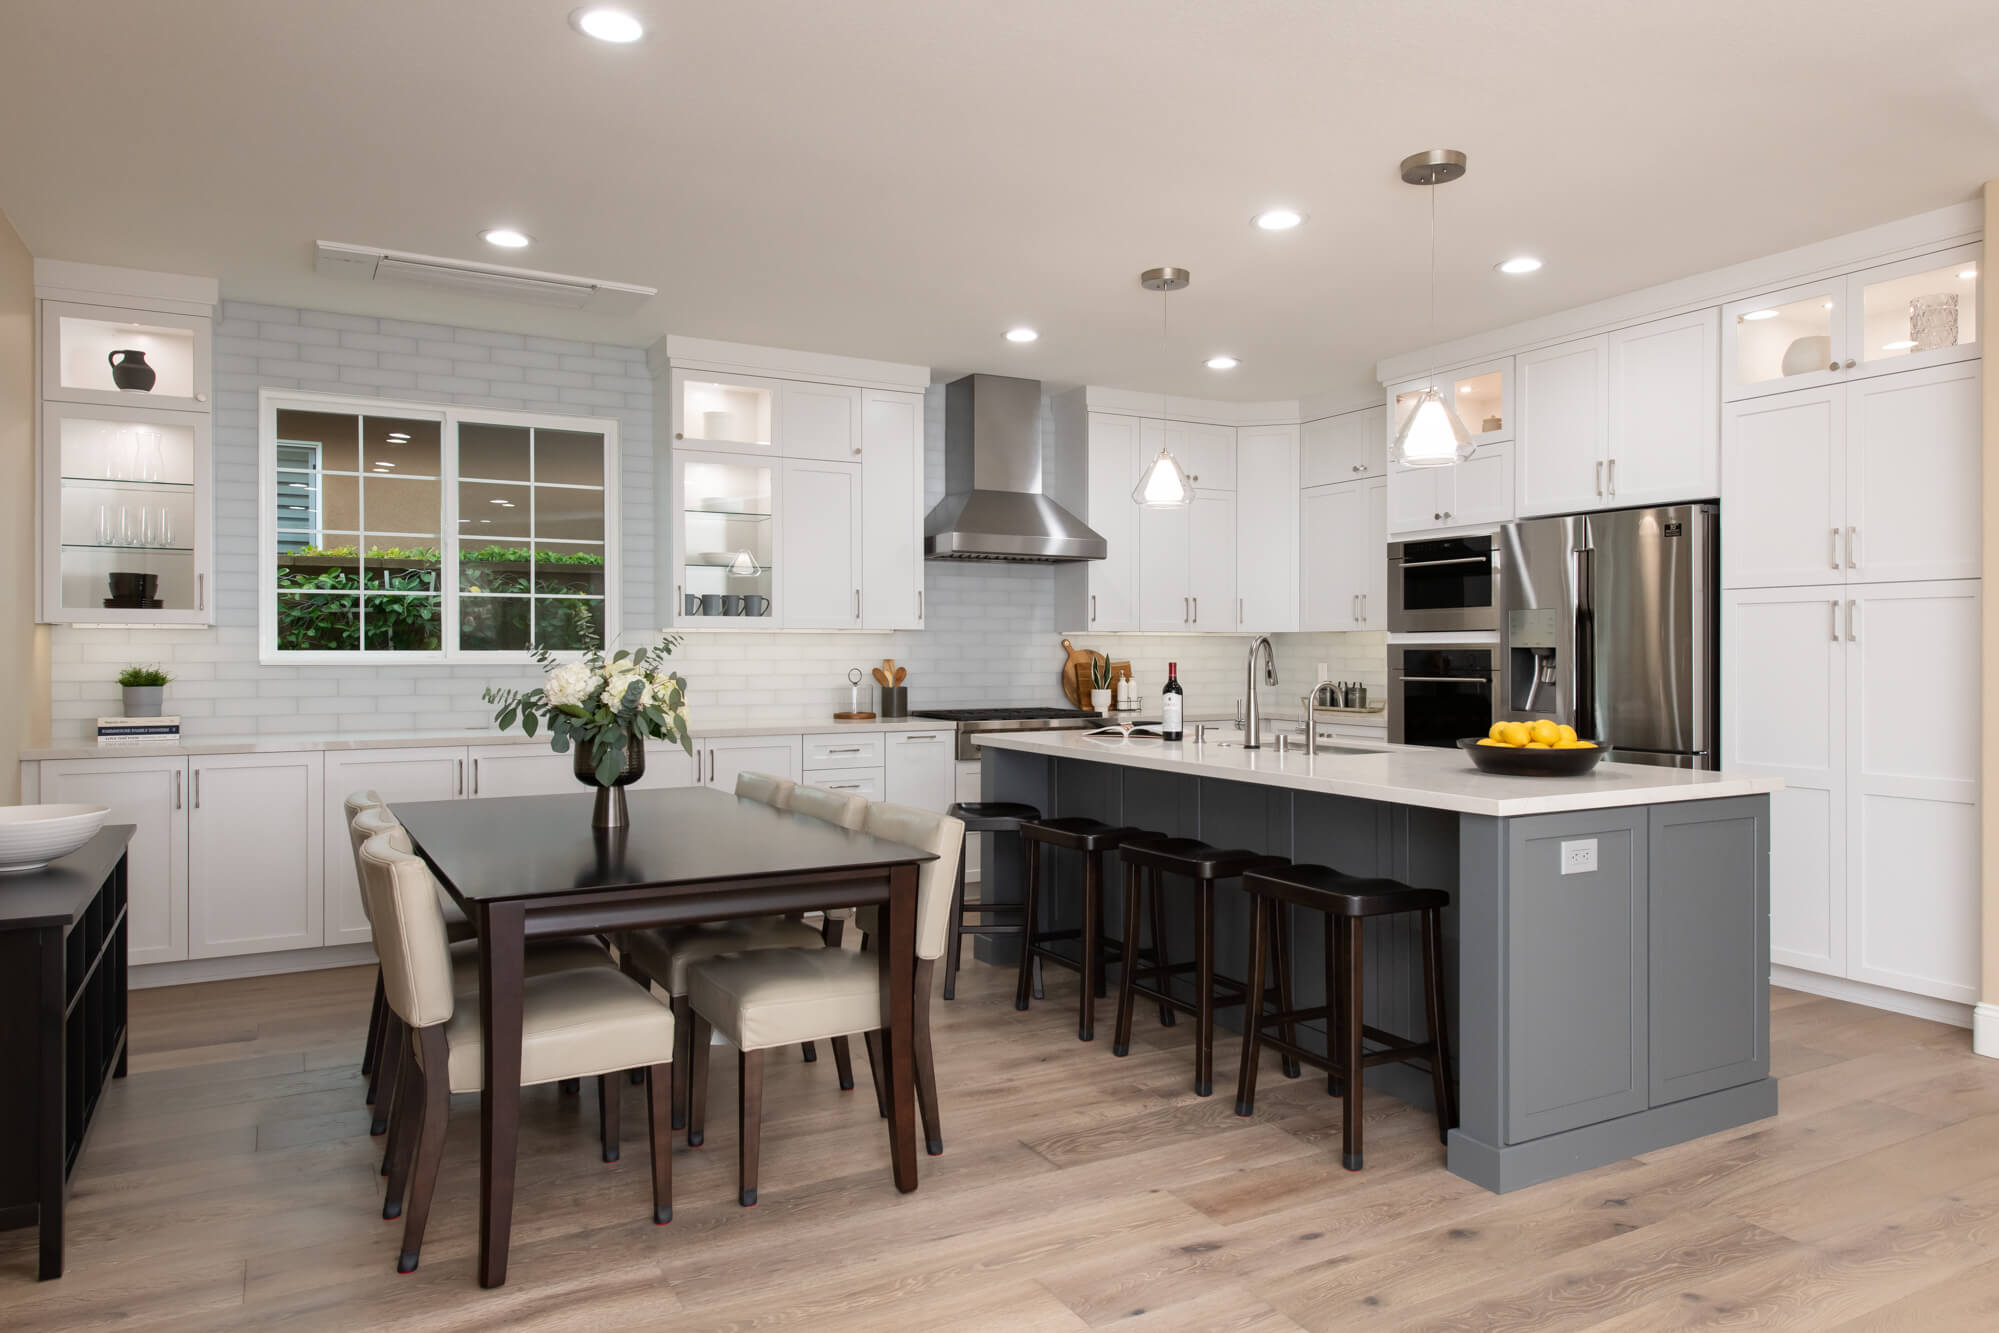 Open concept kitchen layout in Irvine remodel